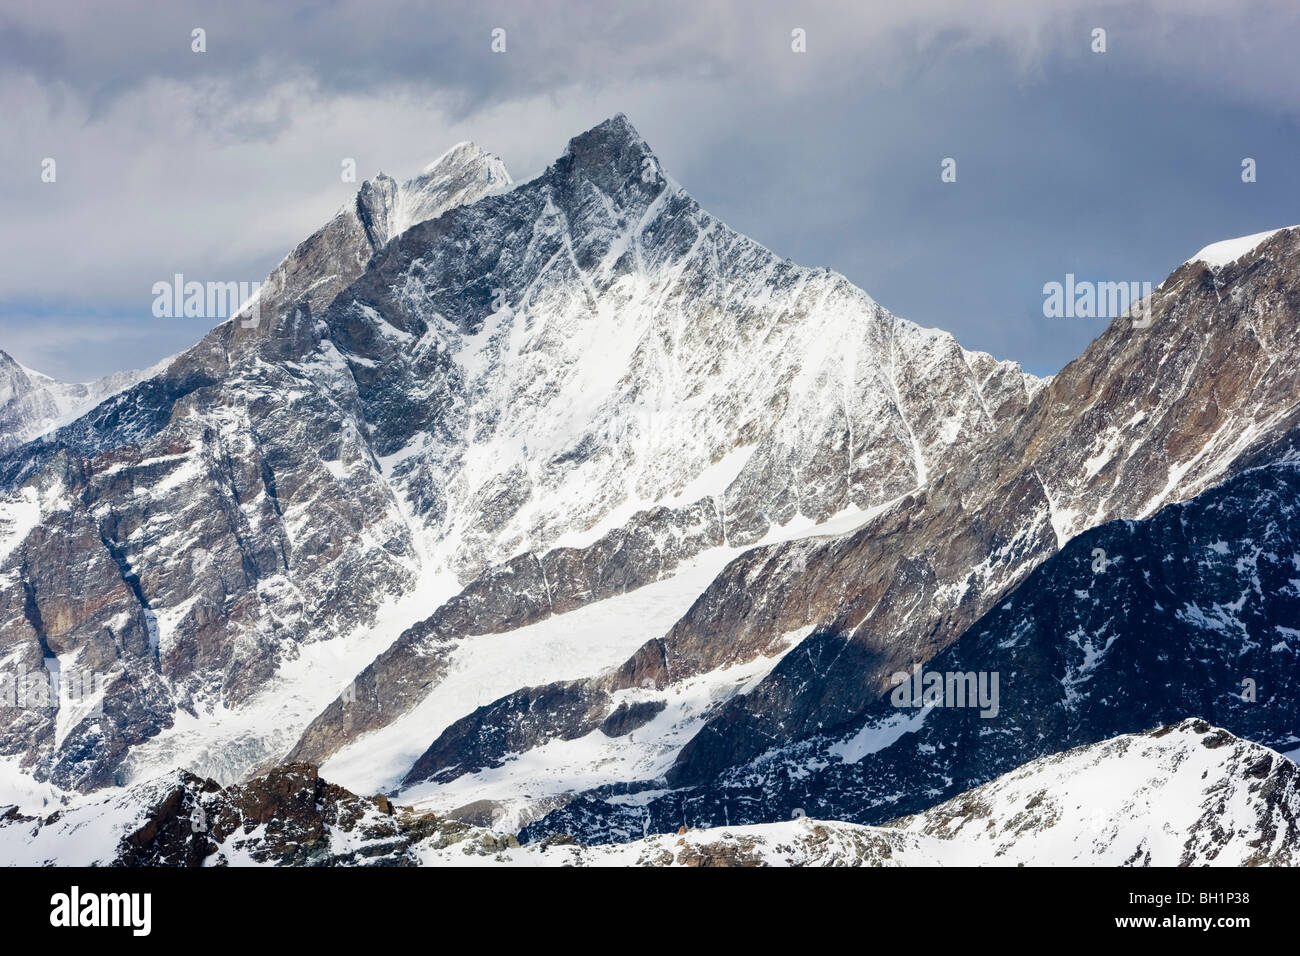 The four thousand meter peaks, Taeschhorn, front, and Dom of the Mischabelgroup, Wallis, Valais Alps, Switzerland Stock Photo